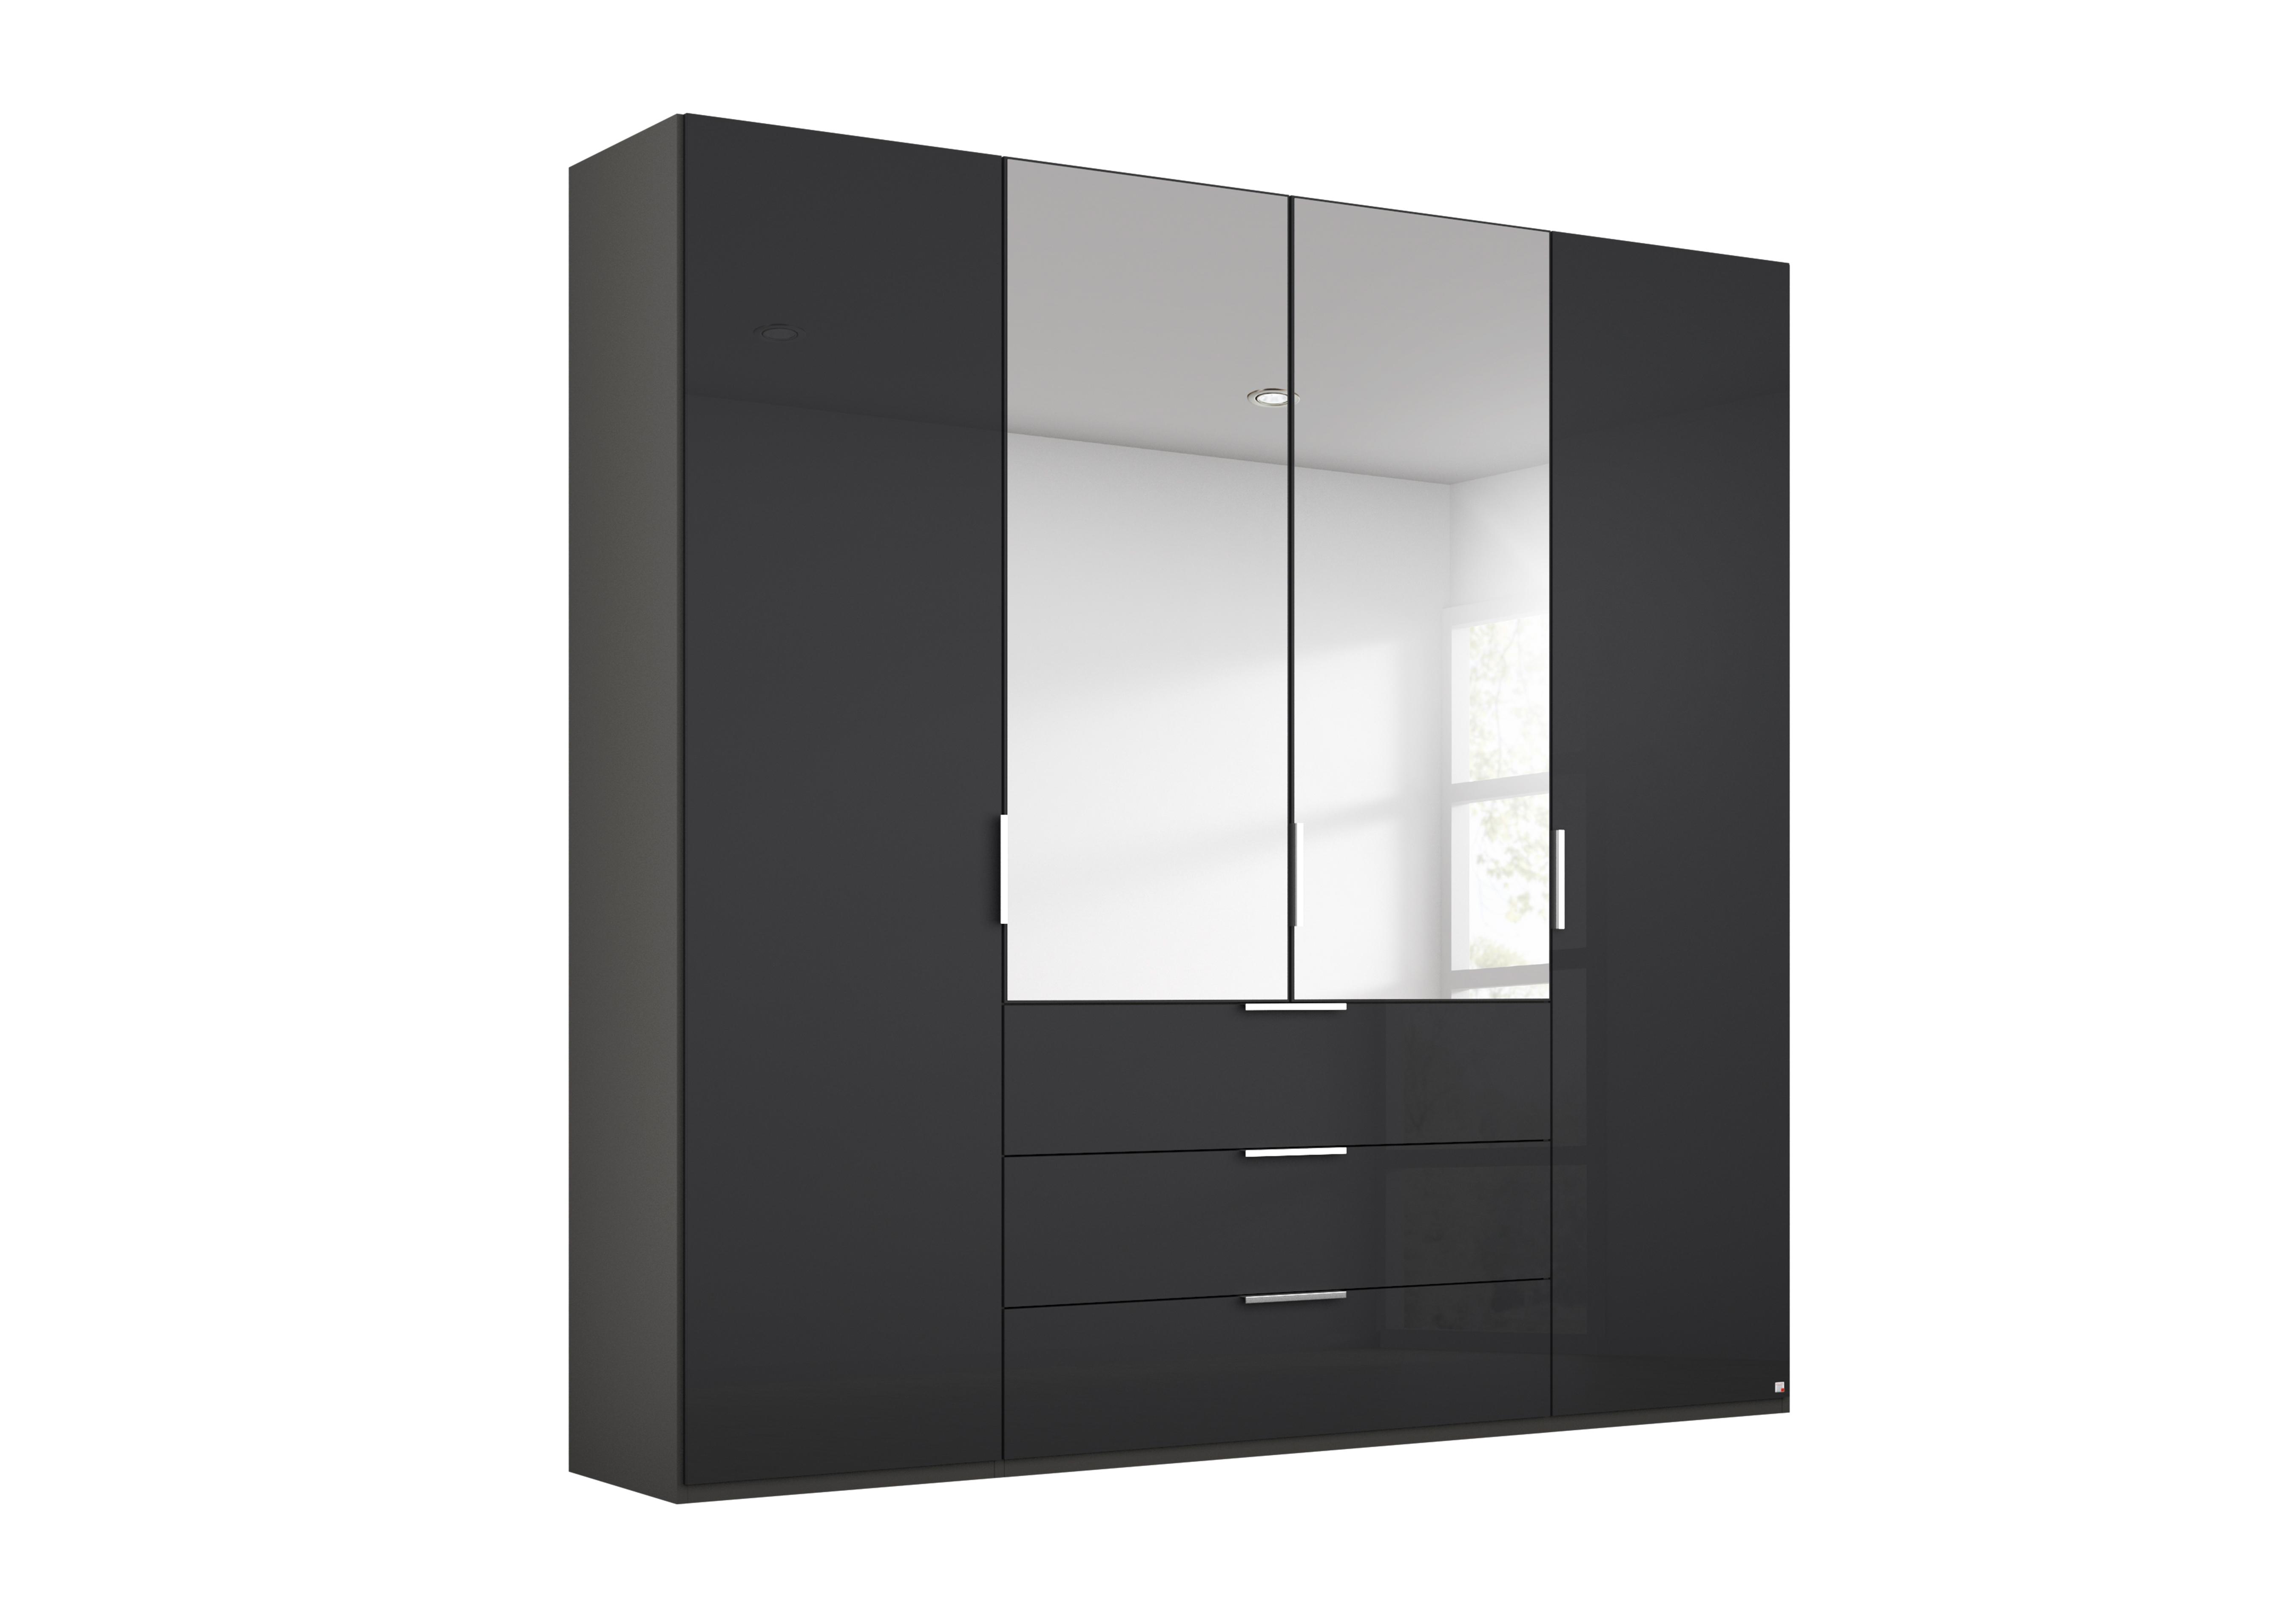 Formes Glass 4 Door Combo Hinged Wardrobe with 2 Mirrors and Drawers in A140b Graphite Basalt Front on Furniture Village